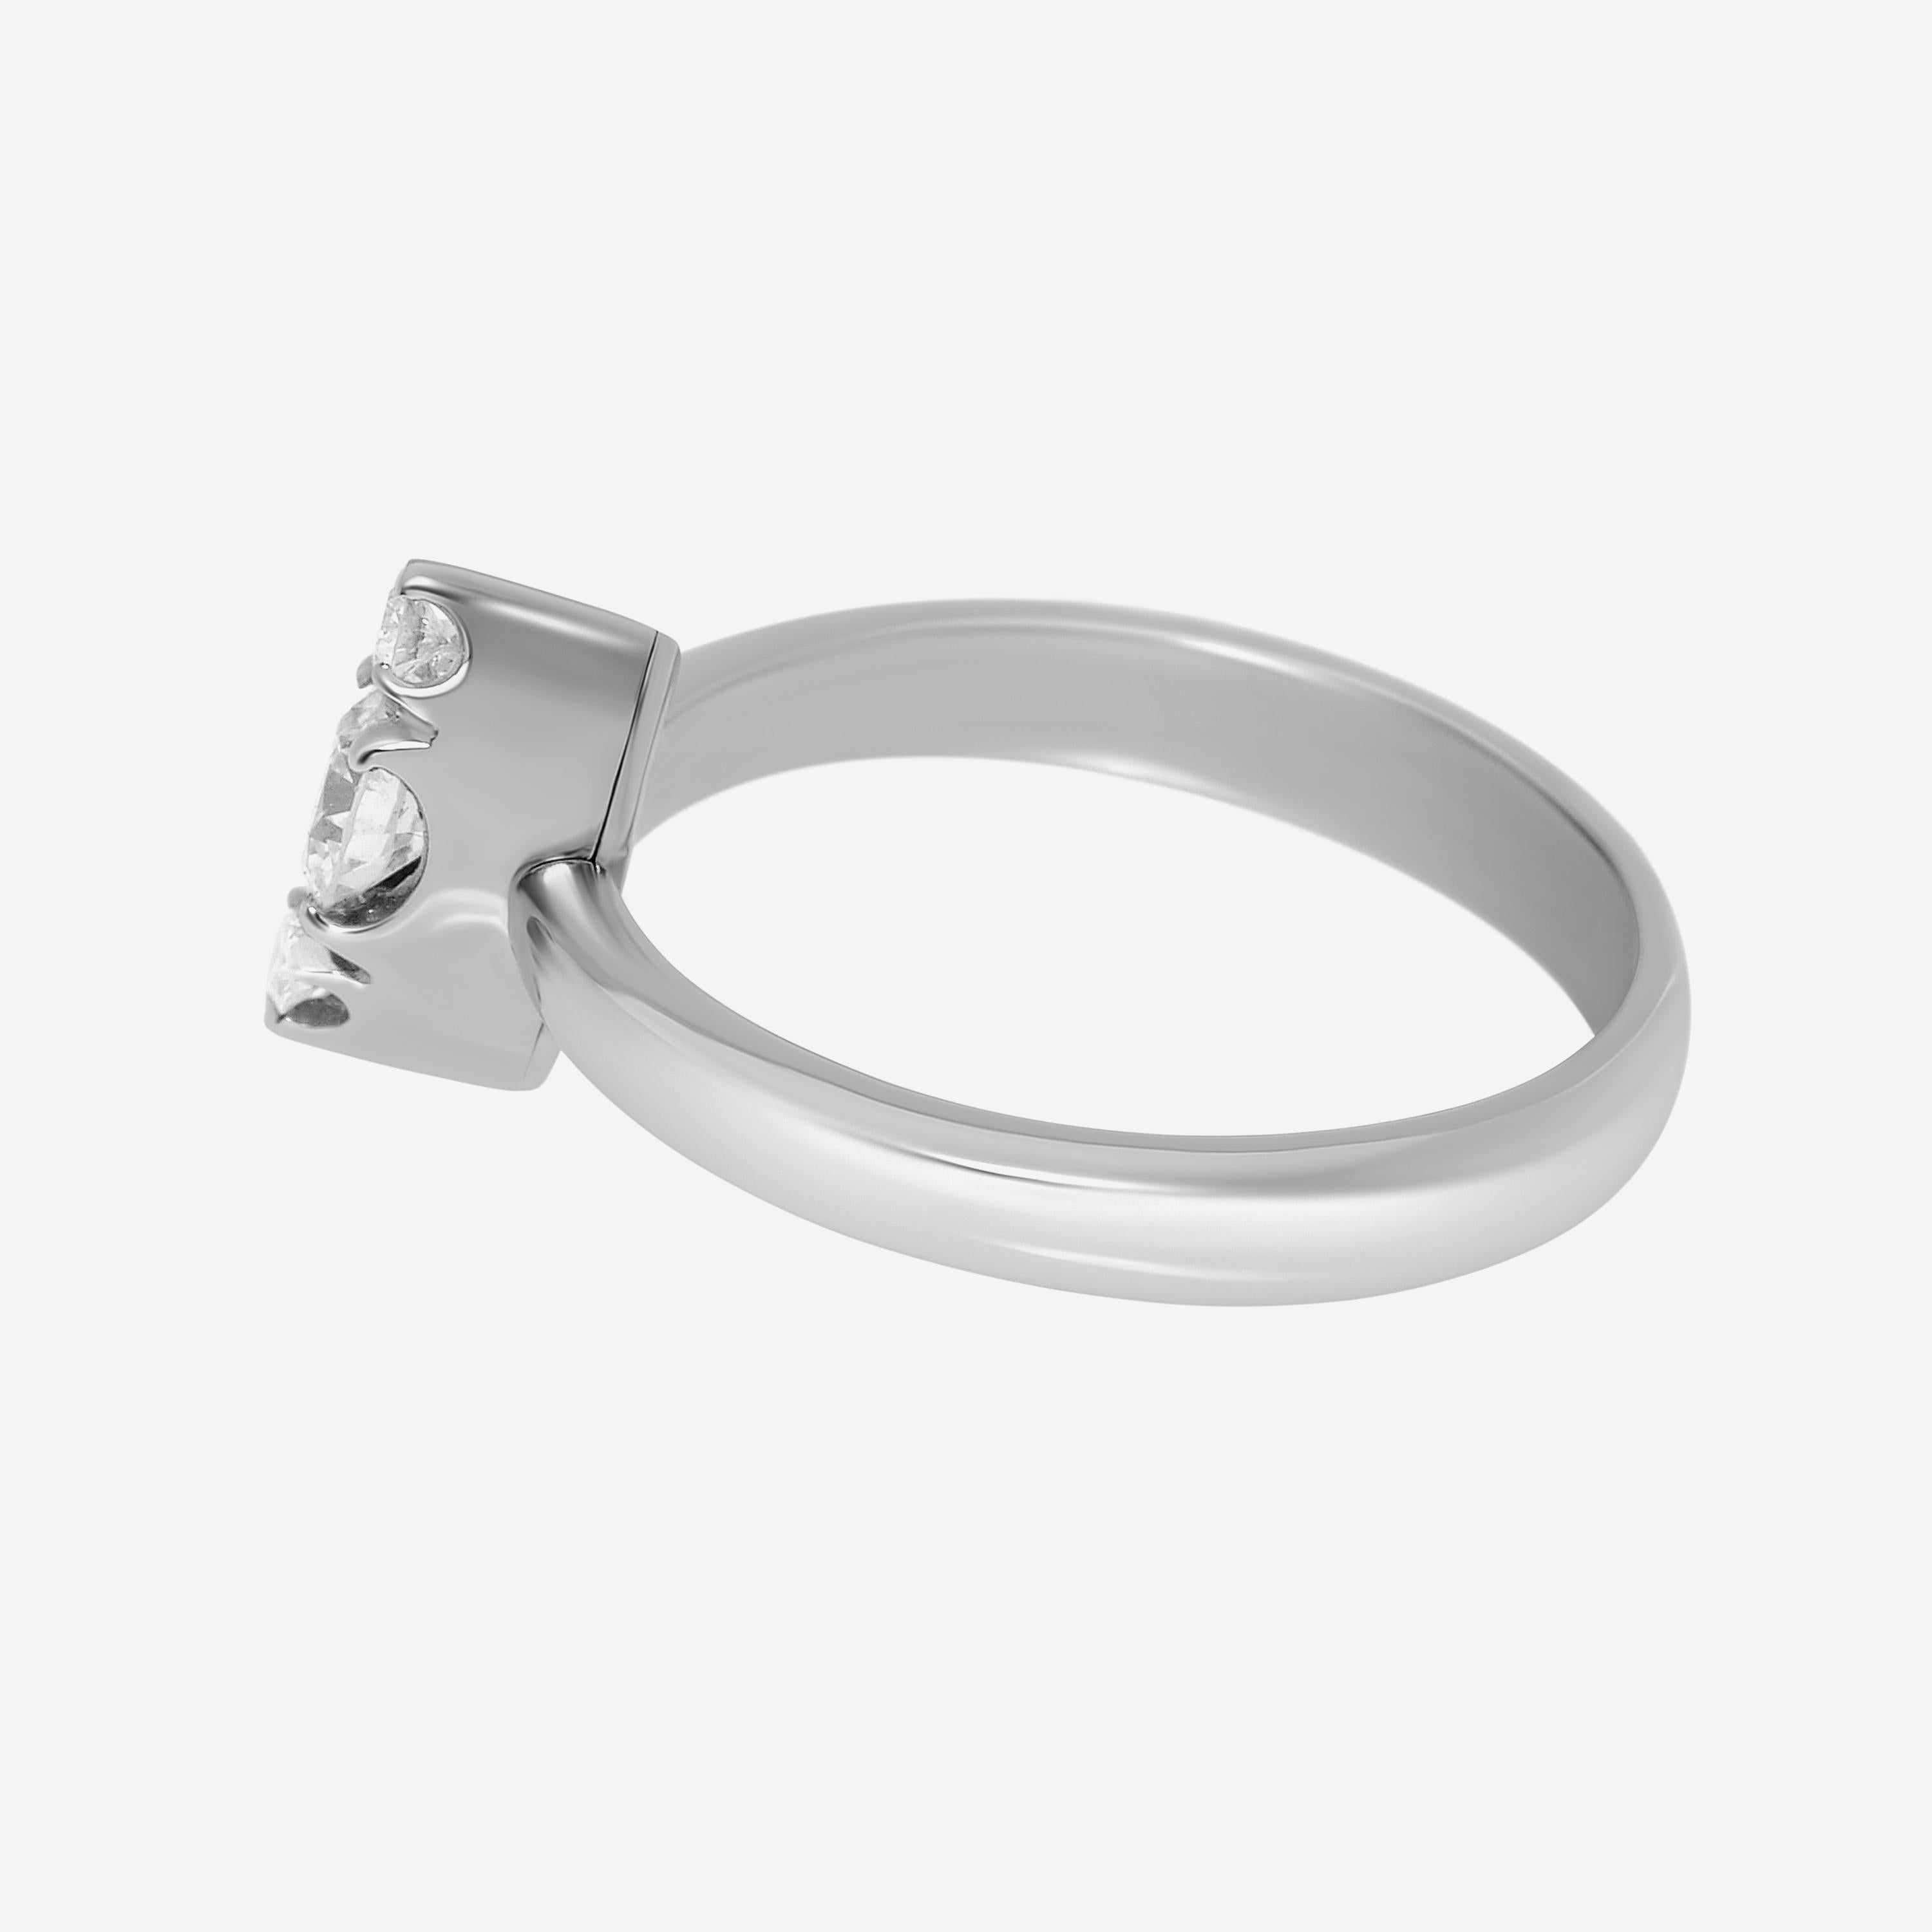 Contemporary Pasquale Bruni 18K White Gold, Diamond Band Ring Sz. 7 For Sale